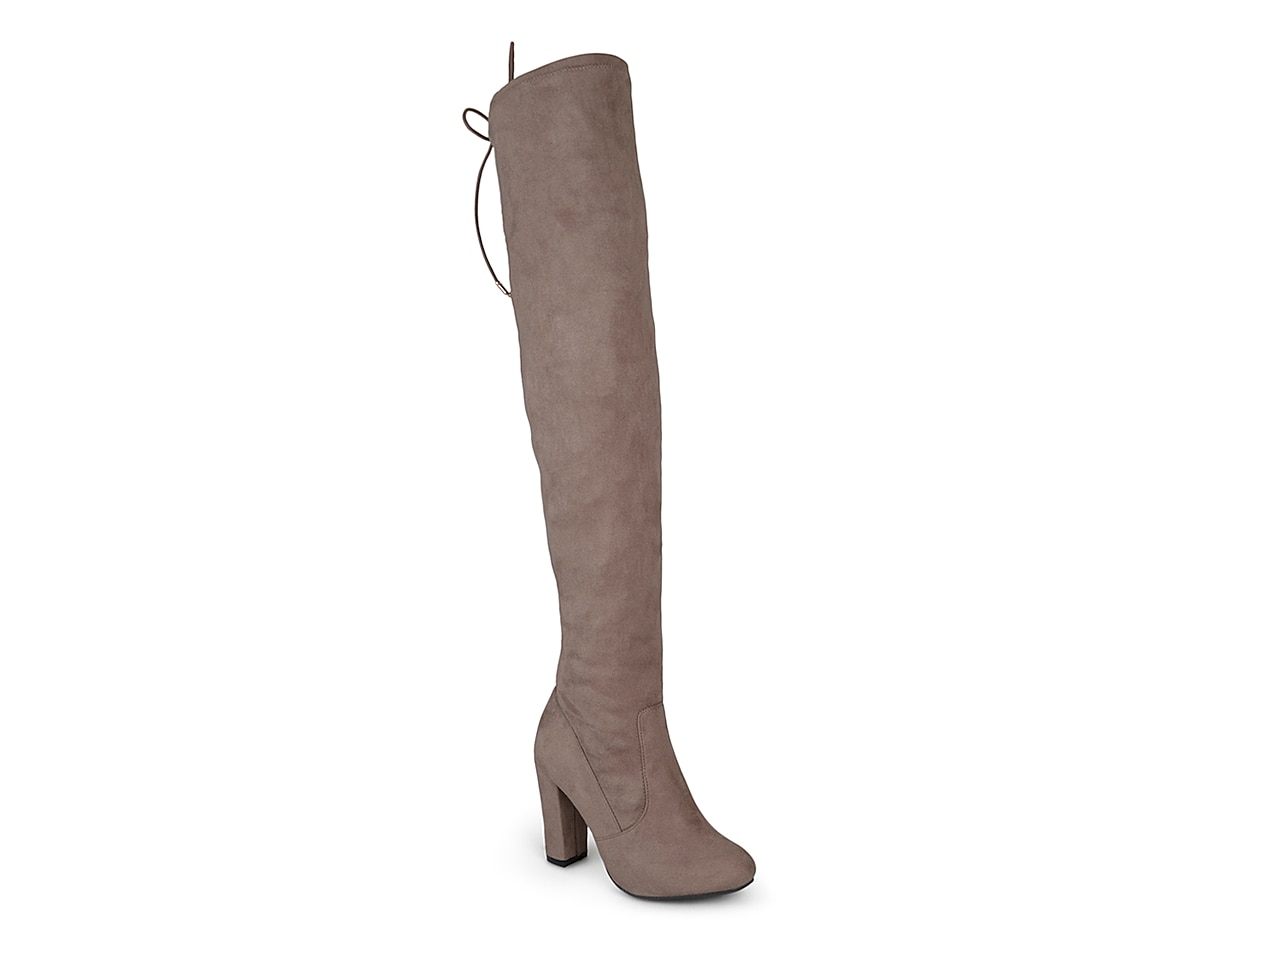 Journee Collection Maya Thigh High Boot Women's Shoes | DSW